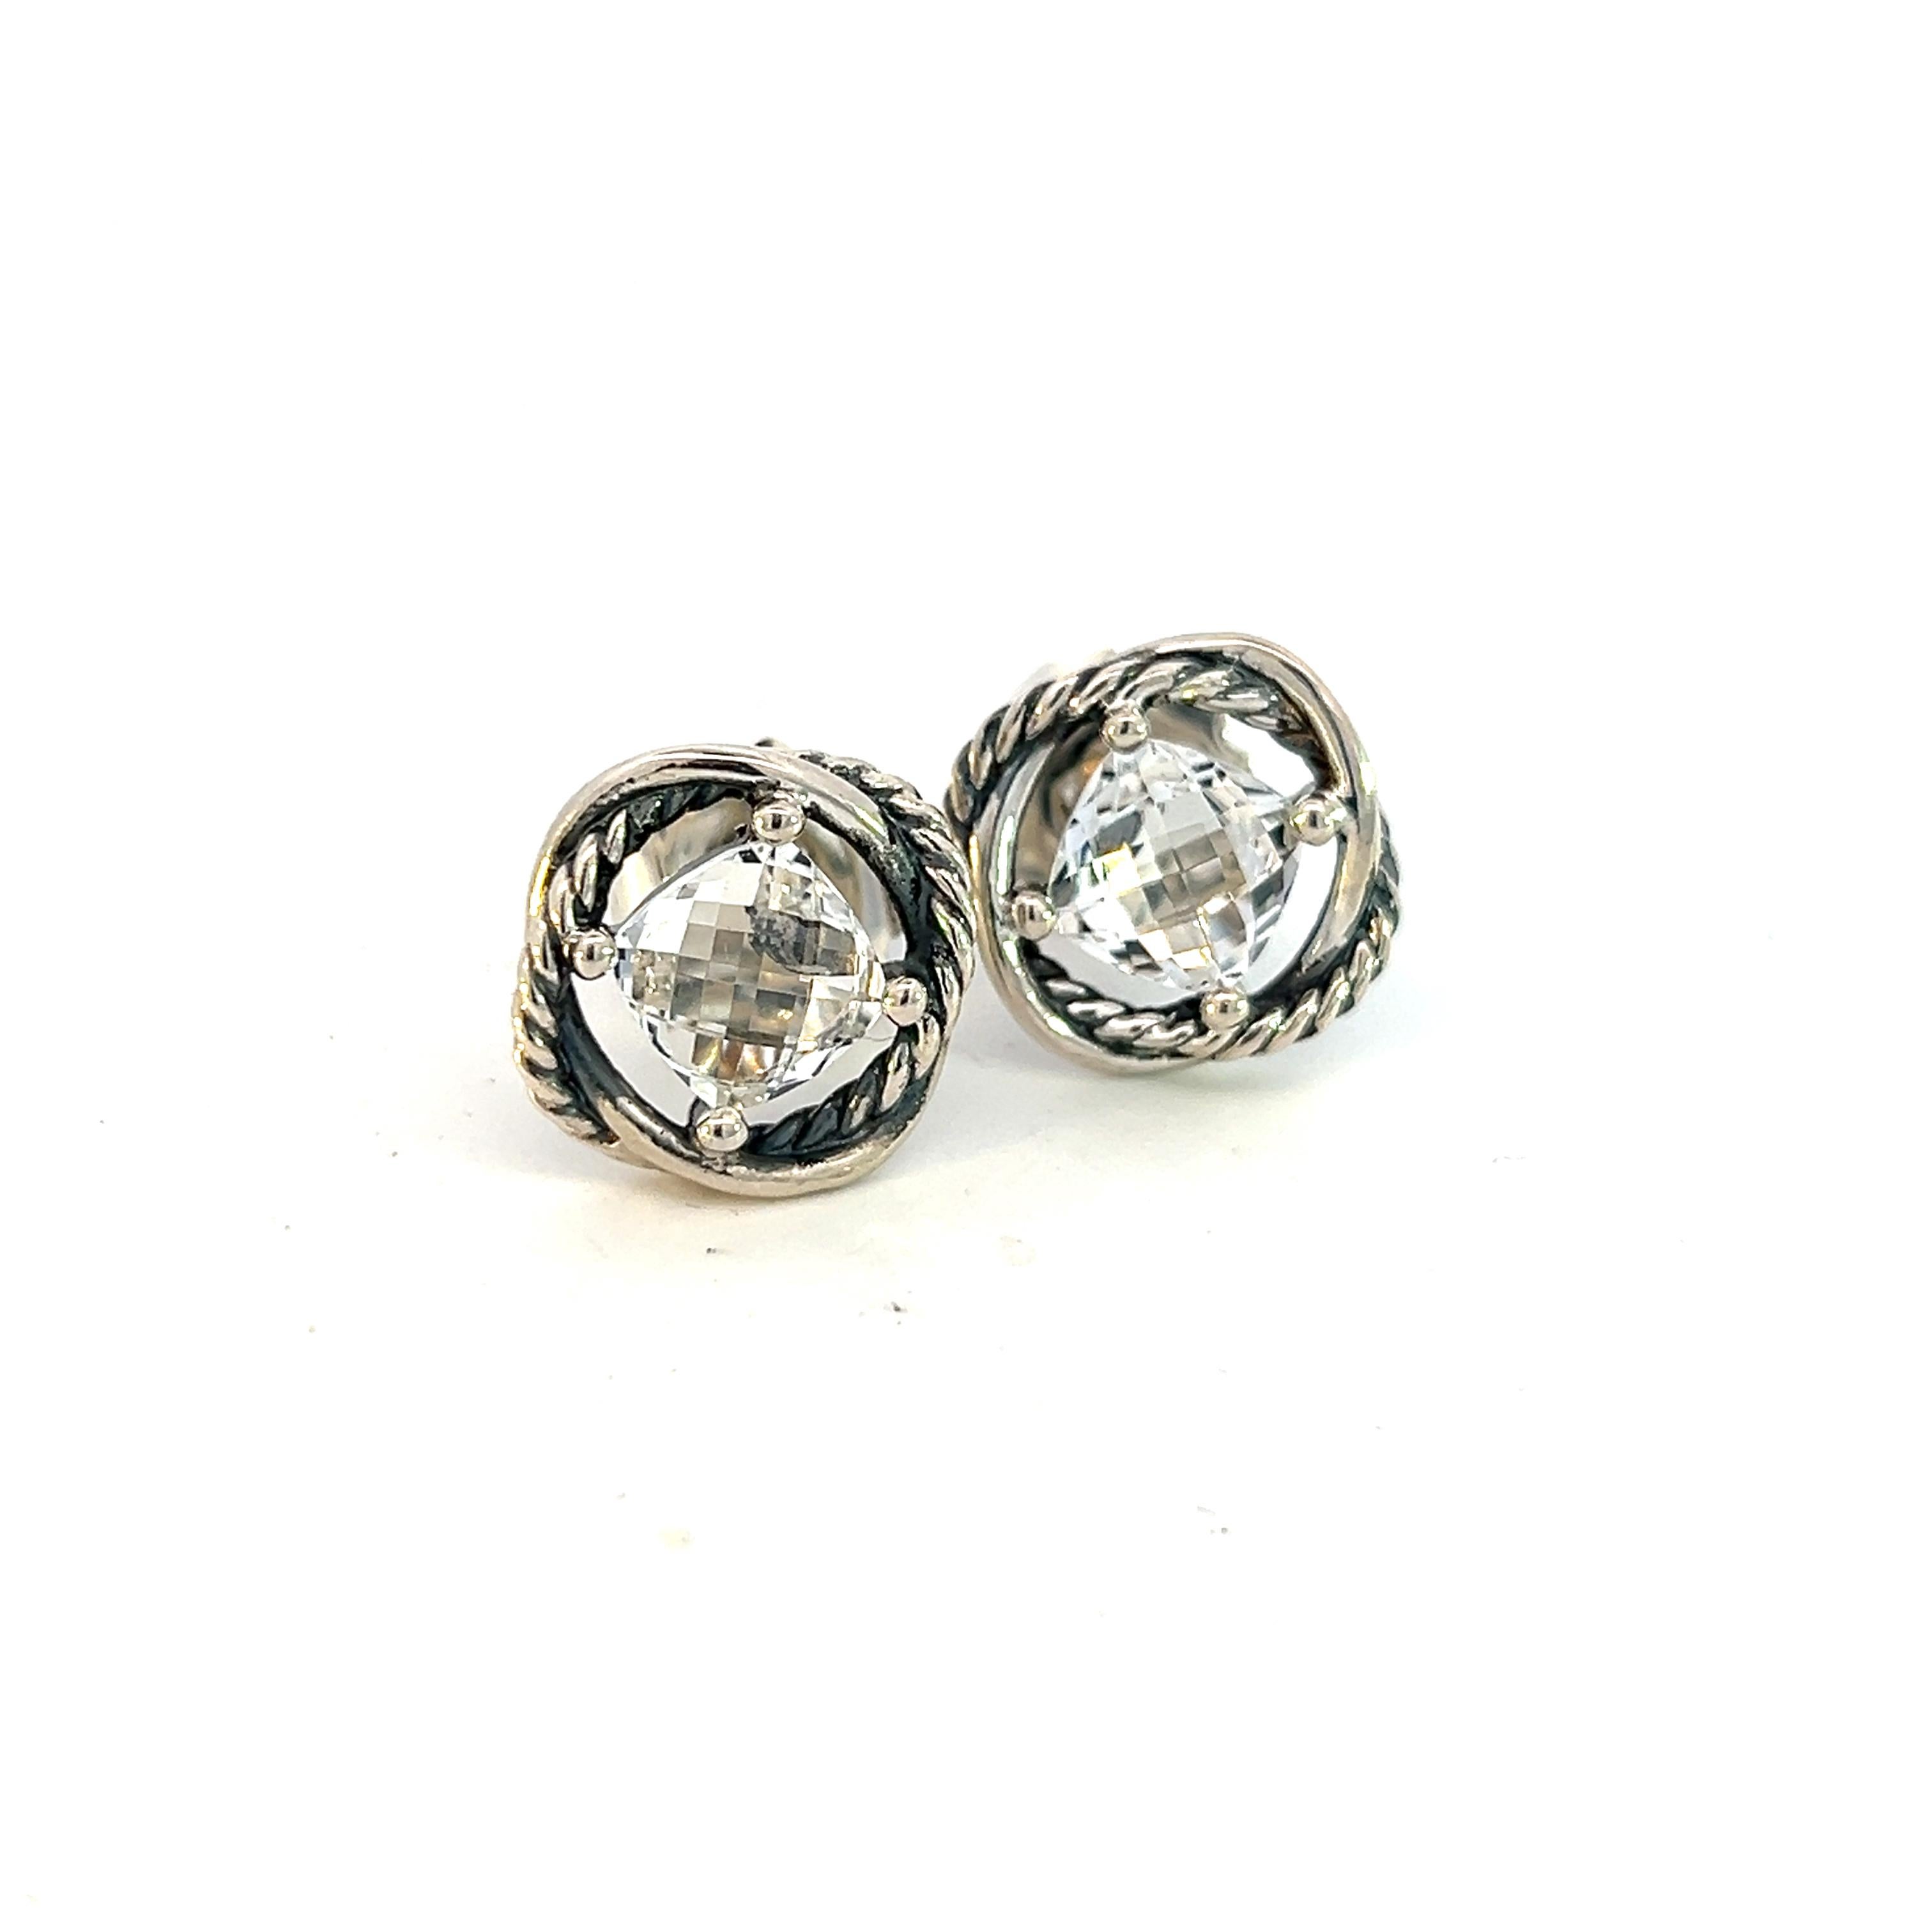 Authentic David Yurman Estate White Topaz Infinity Earrings Silver DY427

Retail: $360.00

These elegant Authentic David Yurman earrings are made of sterling silver.

TRUSTED SELLER SINCE 2002
PLEASE SEE OUR HUNDREDS OF POSITIVE FEEDBACKS FROM OUR